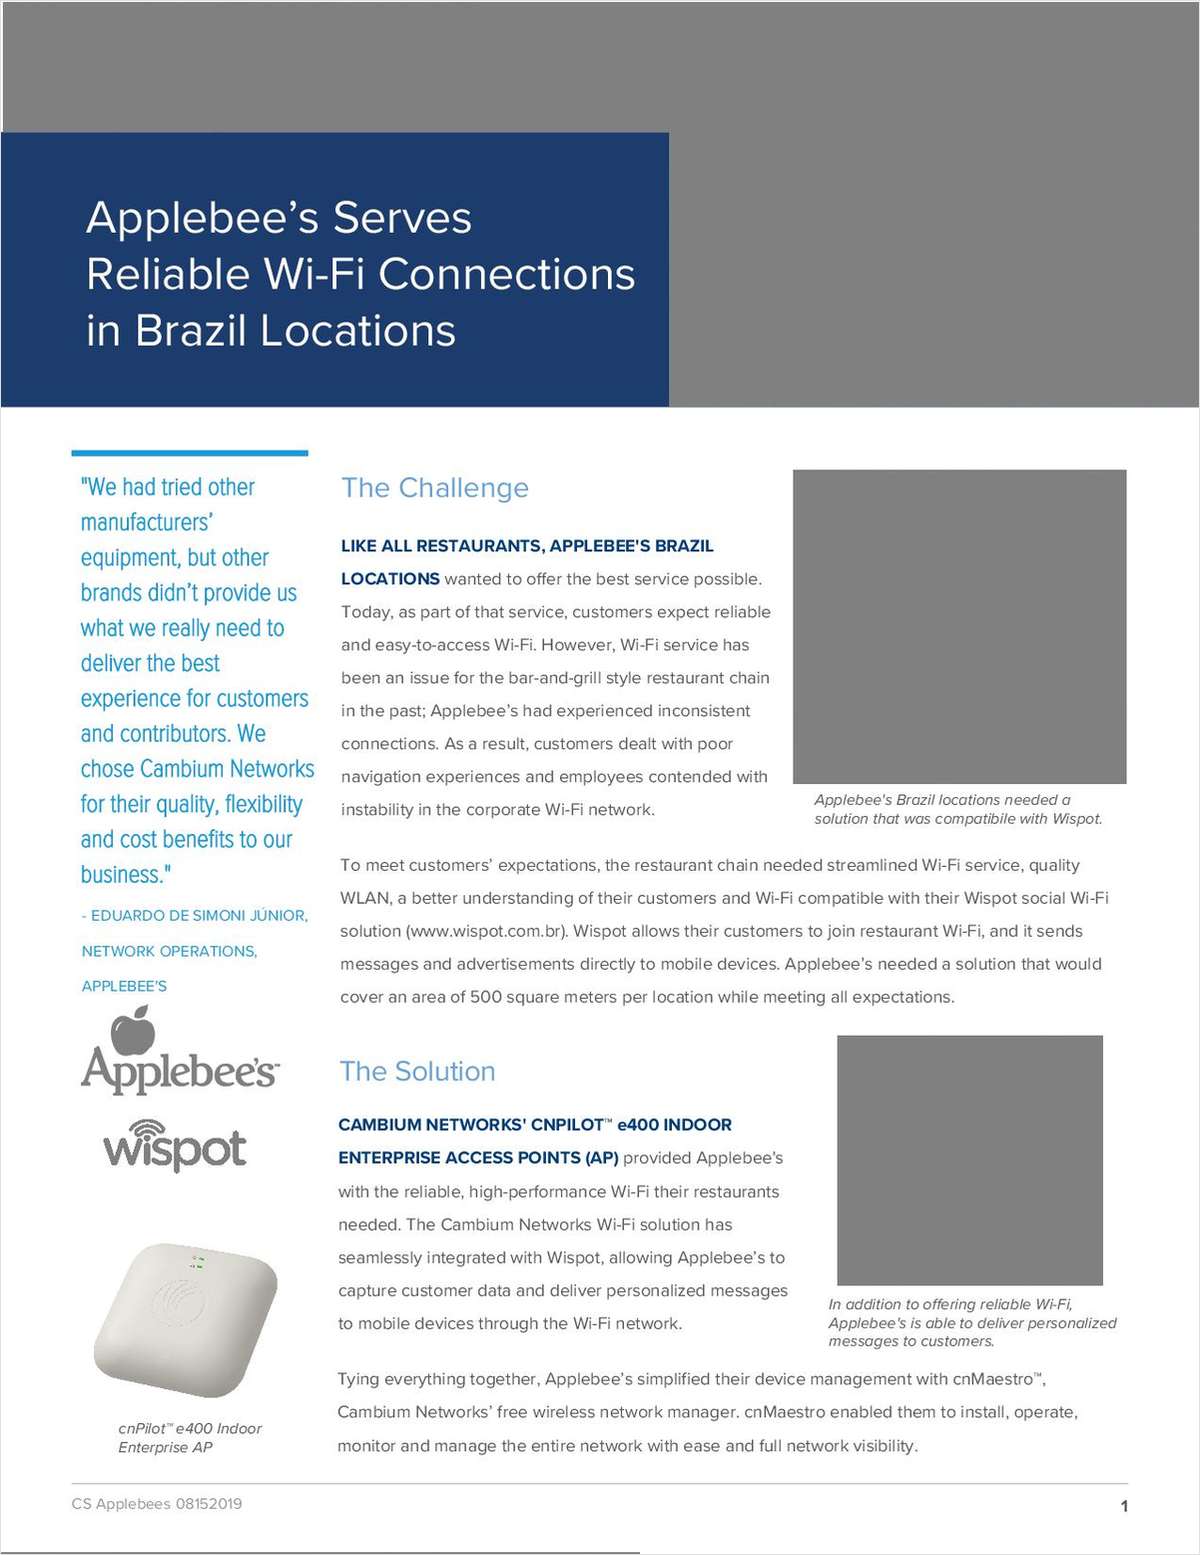 Applebee's Serves Reliable Wi-Fi Connections in Brazil Locations